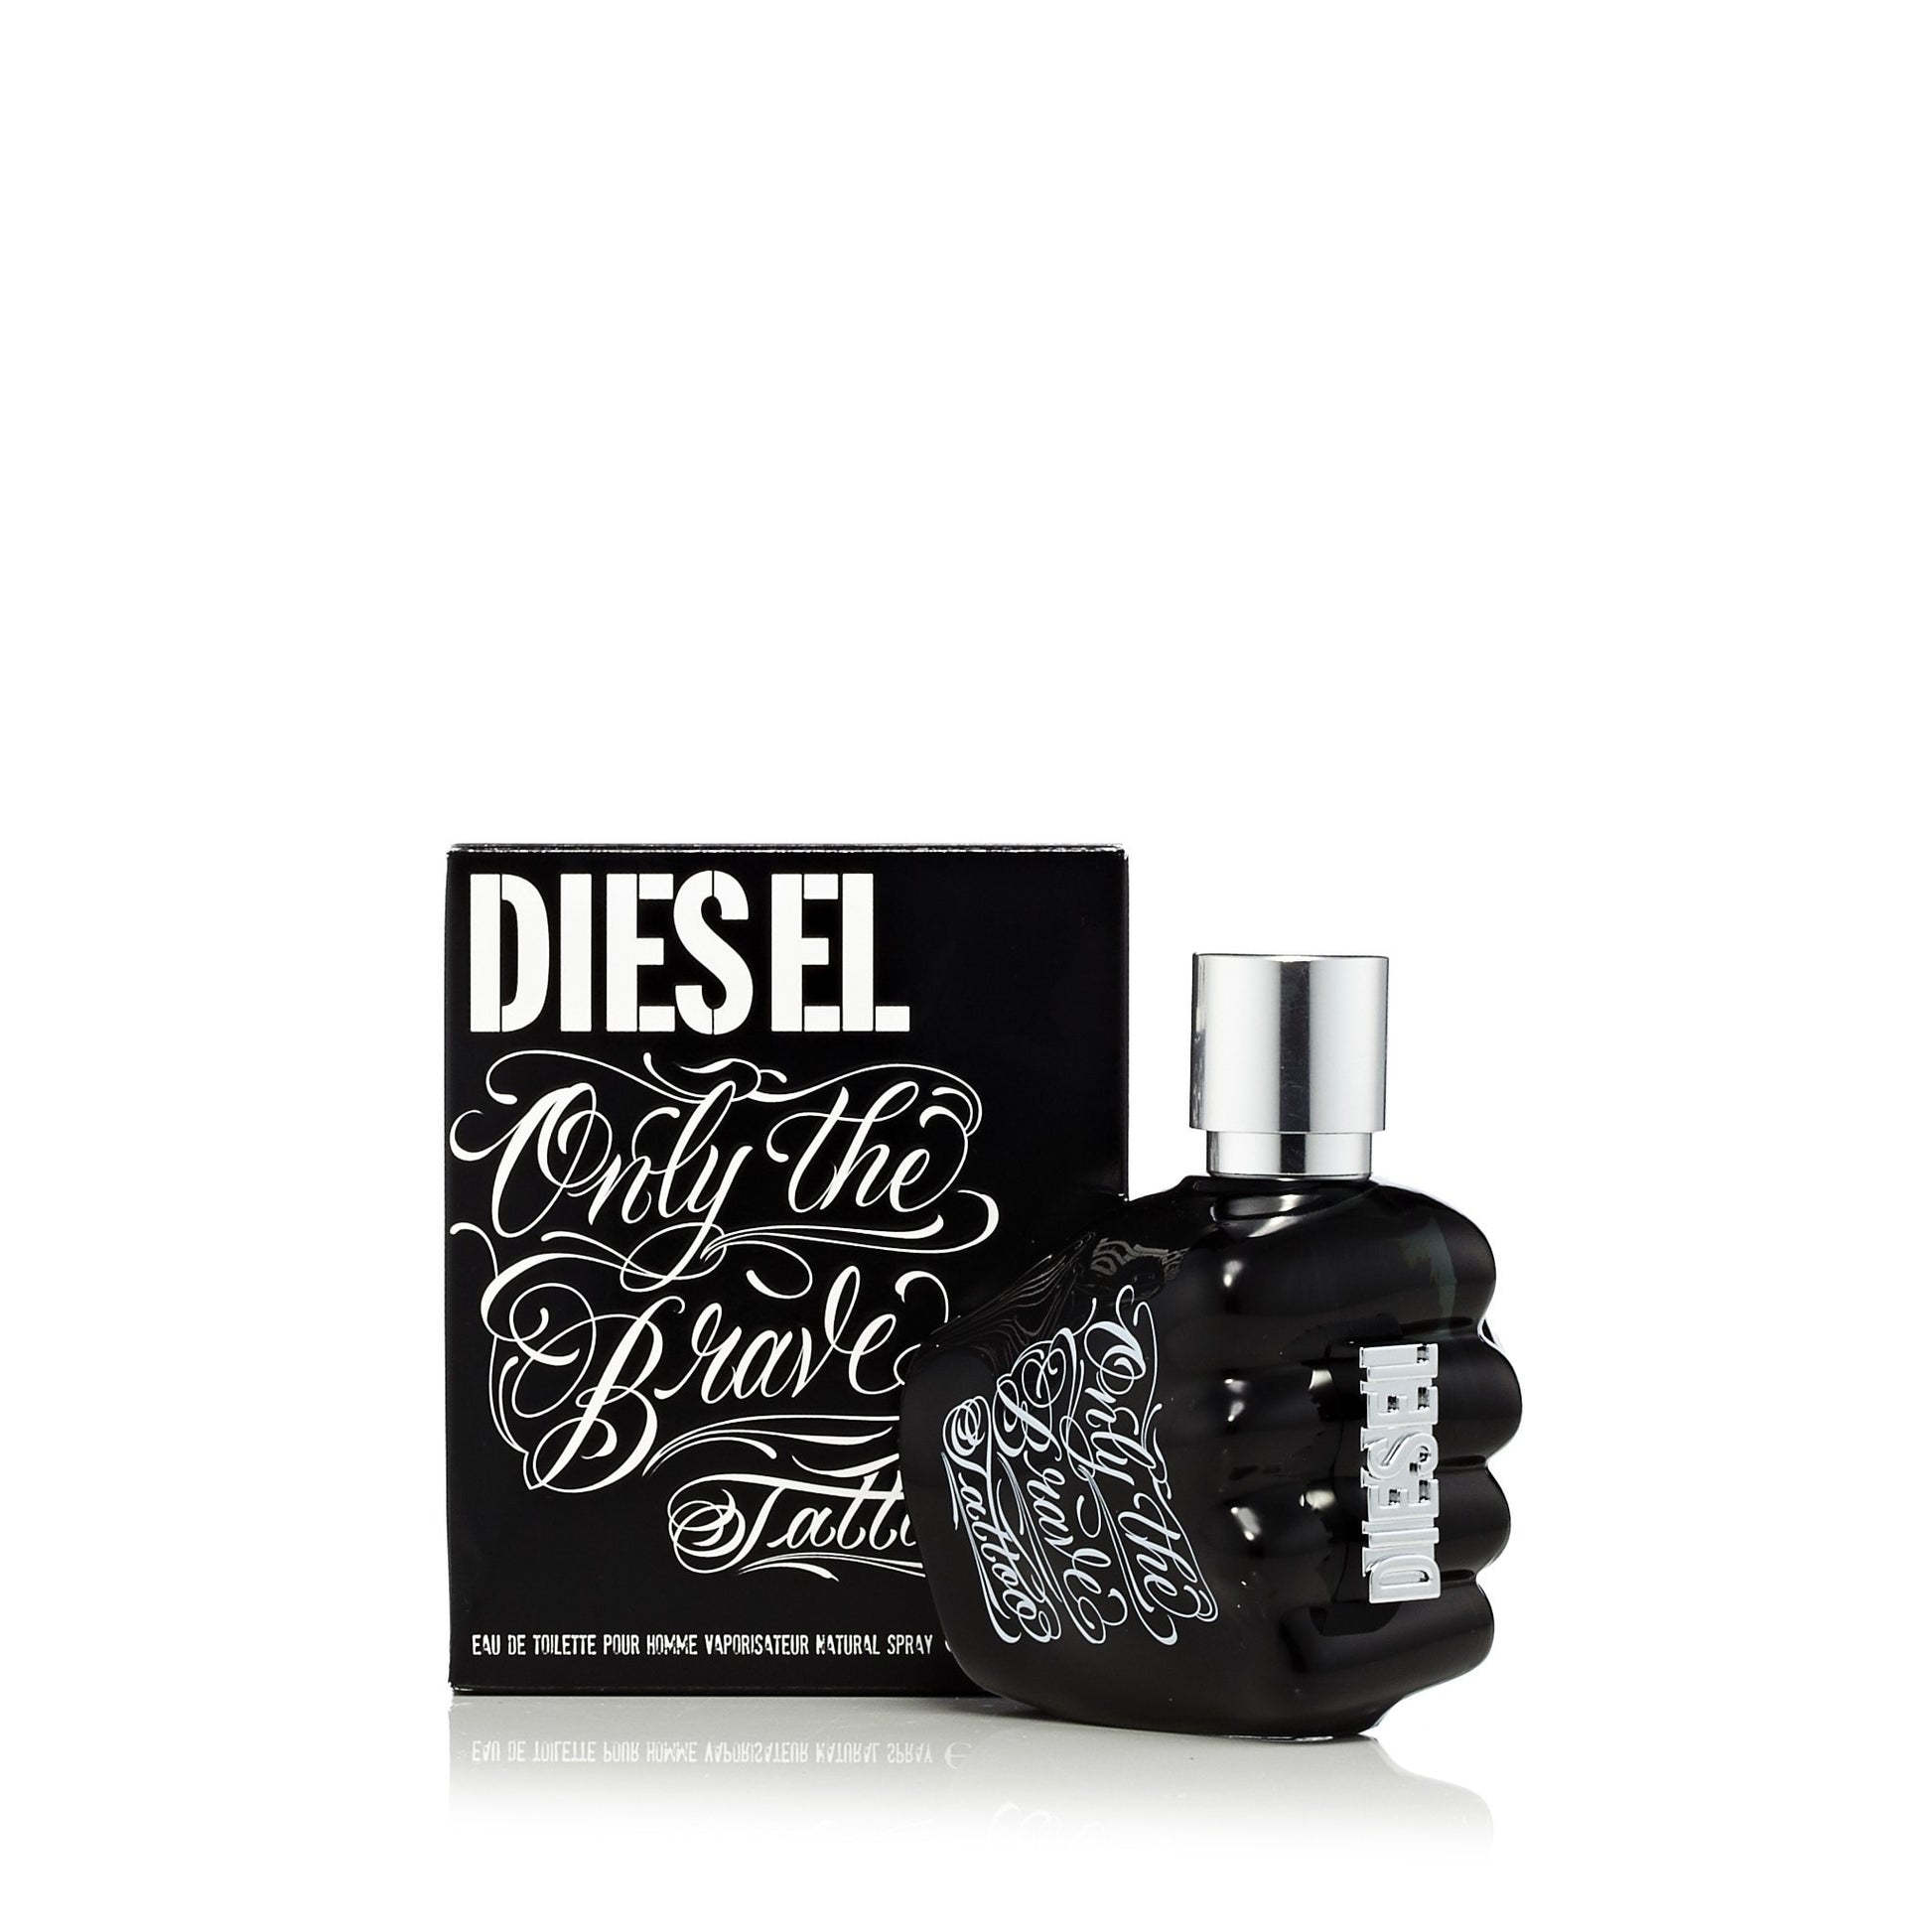 Only The Brave Tattoo Eau de Toilette Spray for Men by Diesel 1.7 oz. Click to open in modal